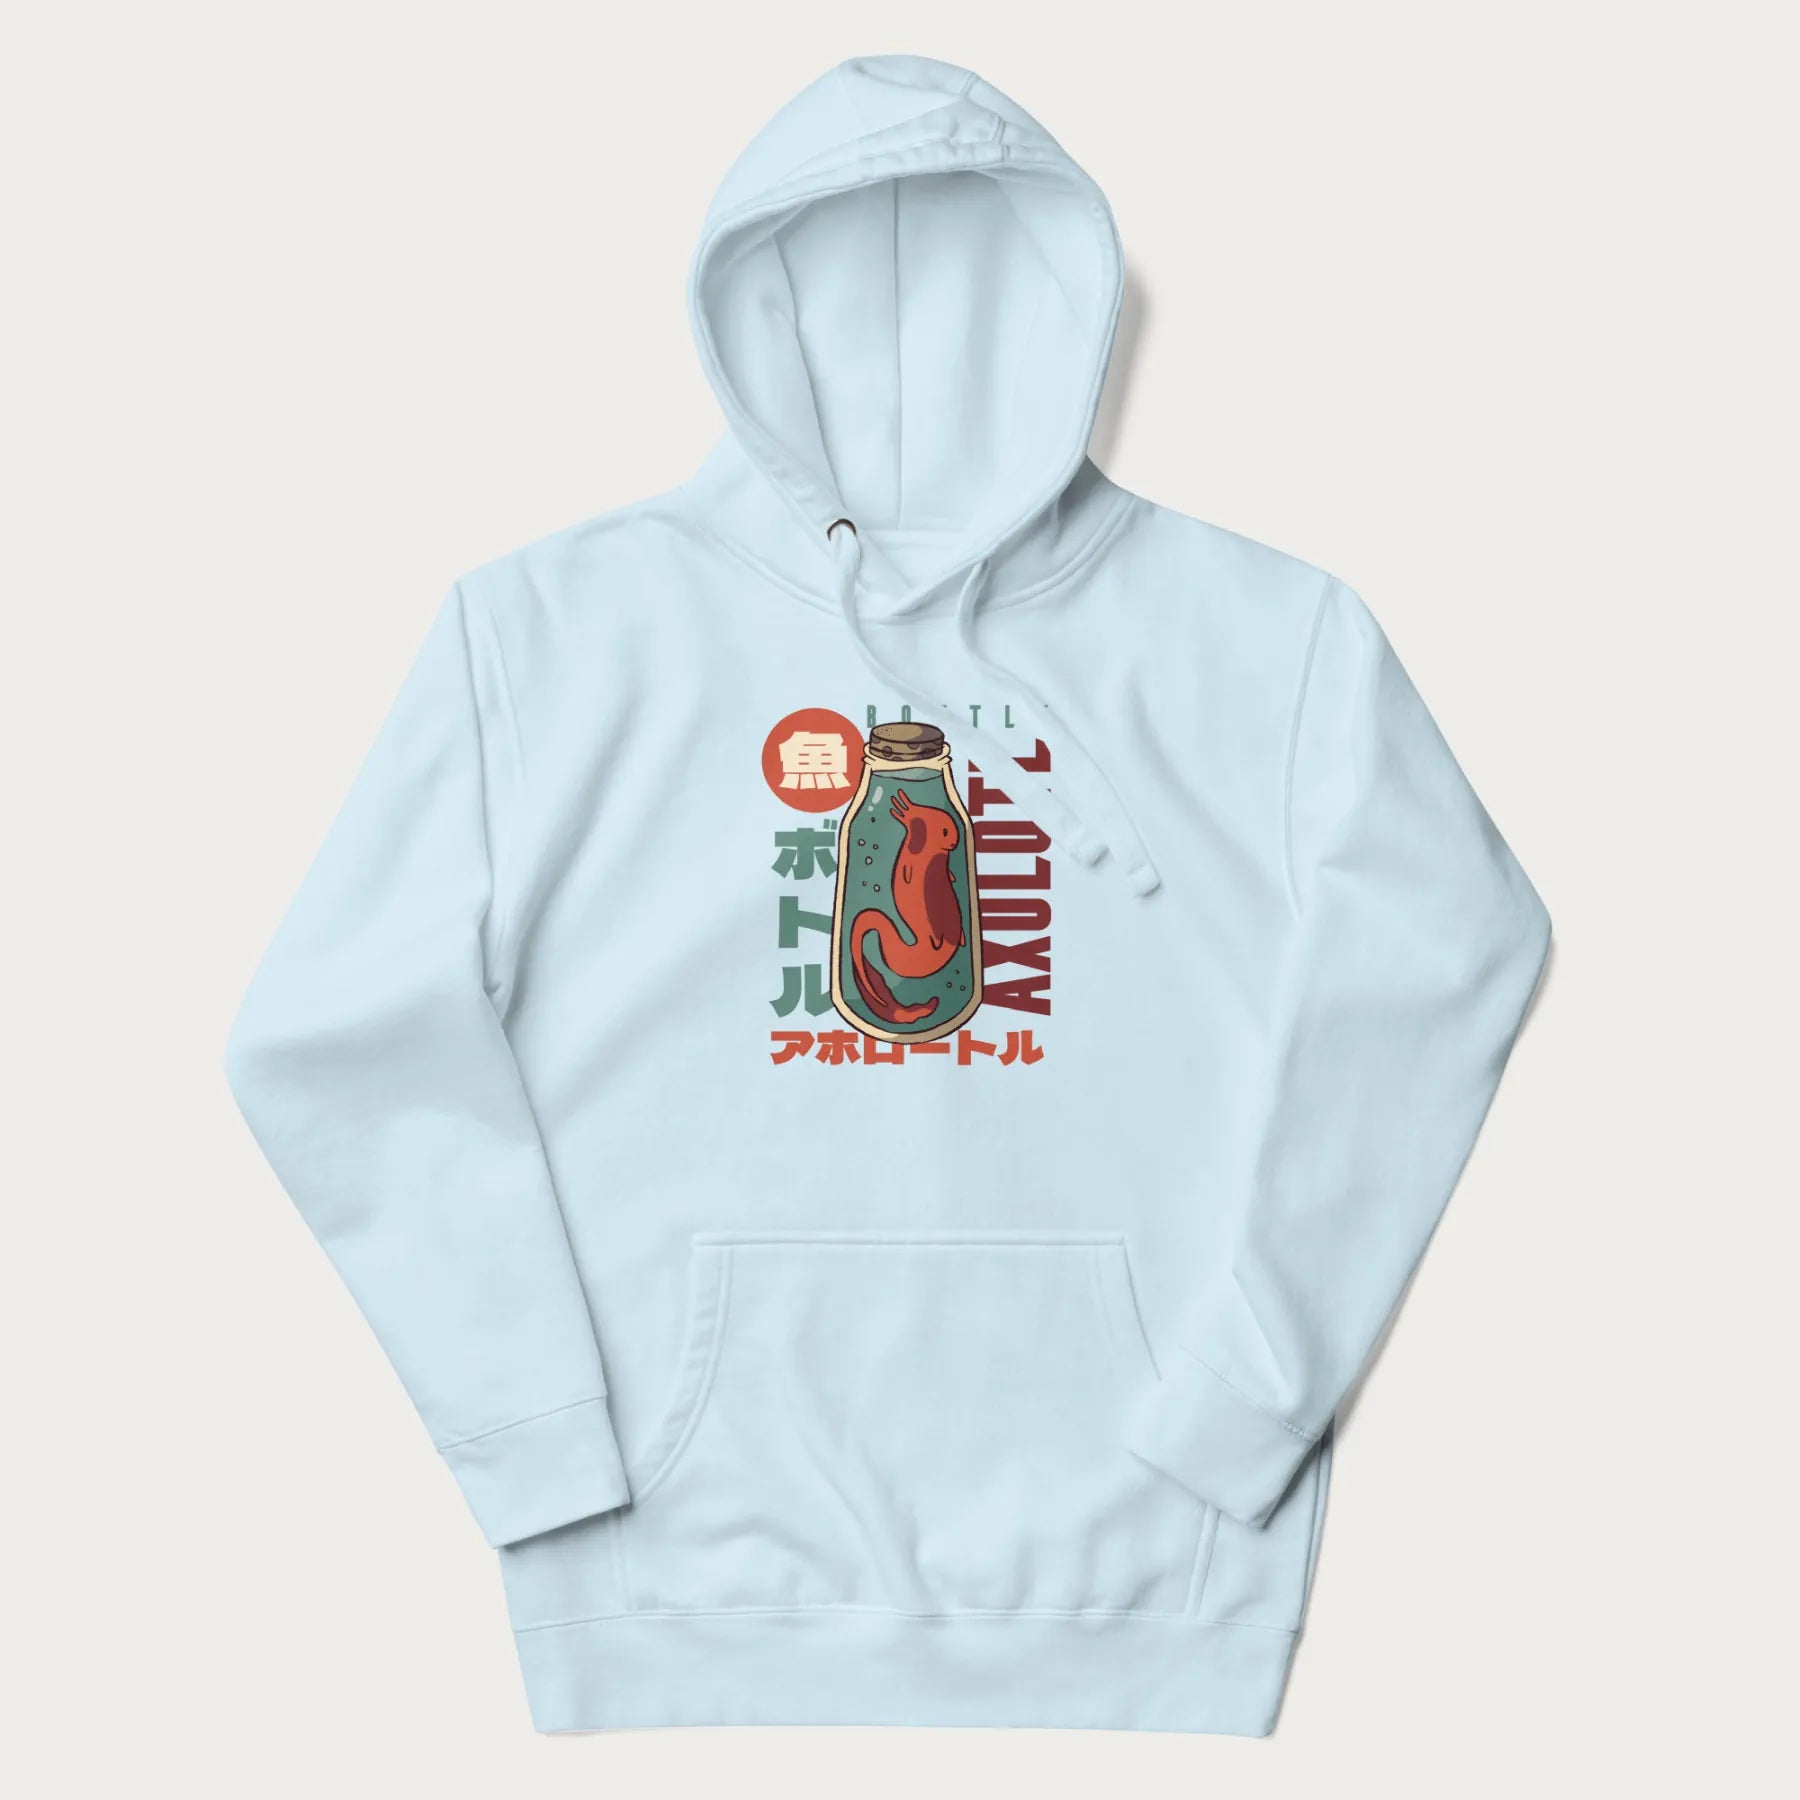 Light blue hoodie with Japanese graphic of a red axolotl in a bottle with Japanese text 'ボトル' (Bottle) and 'アホロートル' (Axolotl).